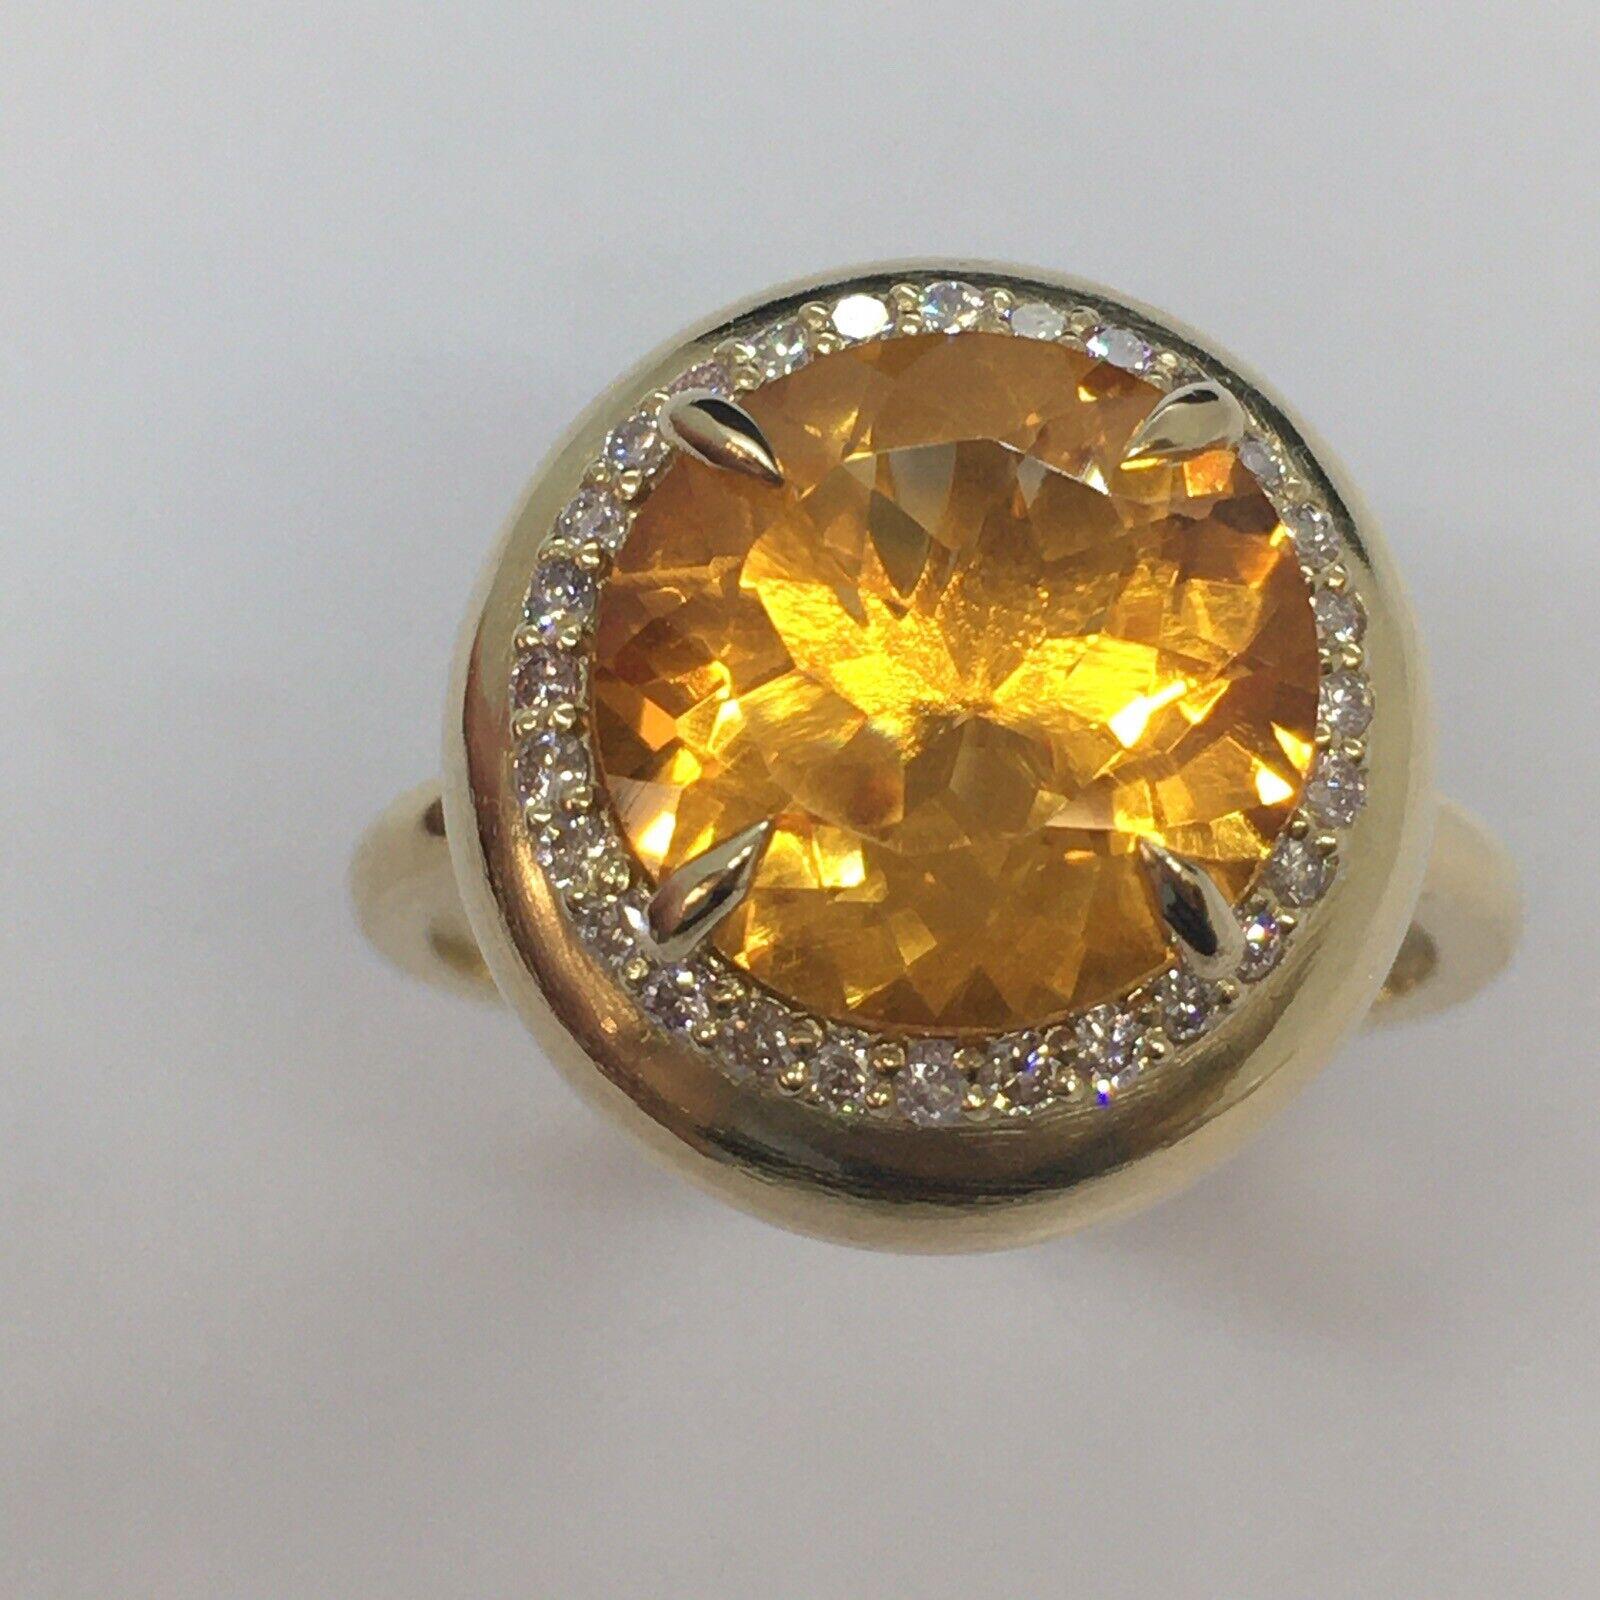 14K Yellow Gold Citrine 1/4 Carat Total Weight Red Diamond Bombe’ Ring Size 10

12mm round citrine 5.5 Carat weight 
28 pieces of 1.3 mm round natural Rose Color Diamond 1/4 Carat total diamond weight
8.4 gram
Size 10
3/4 inch in diameter on